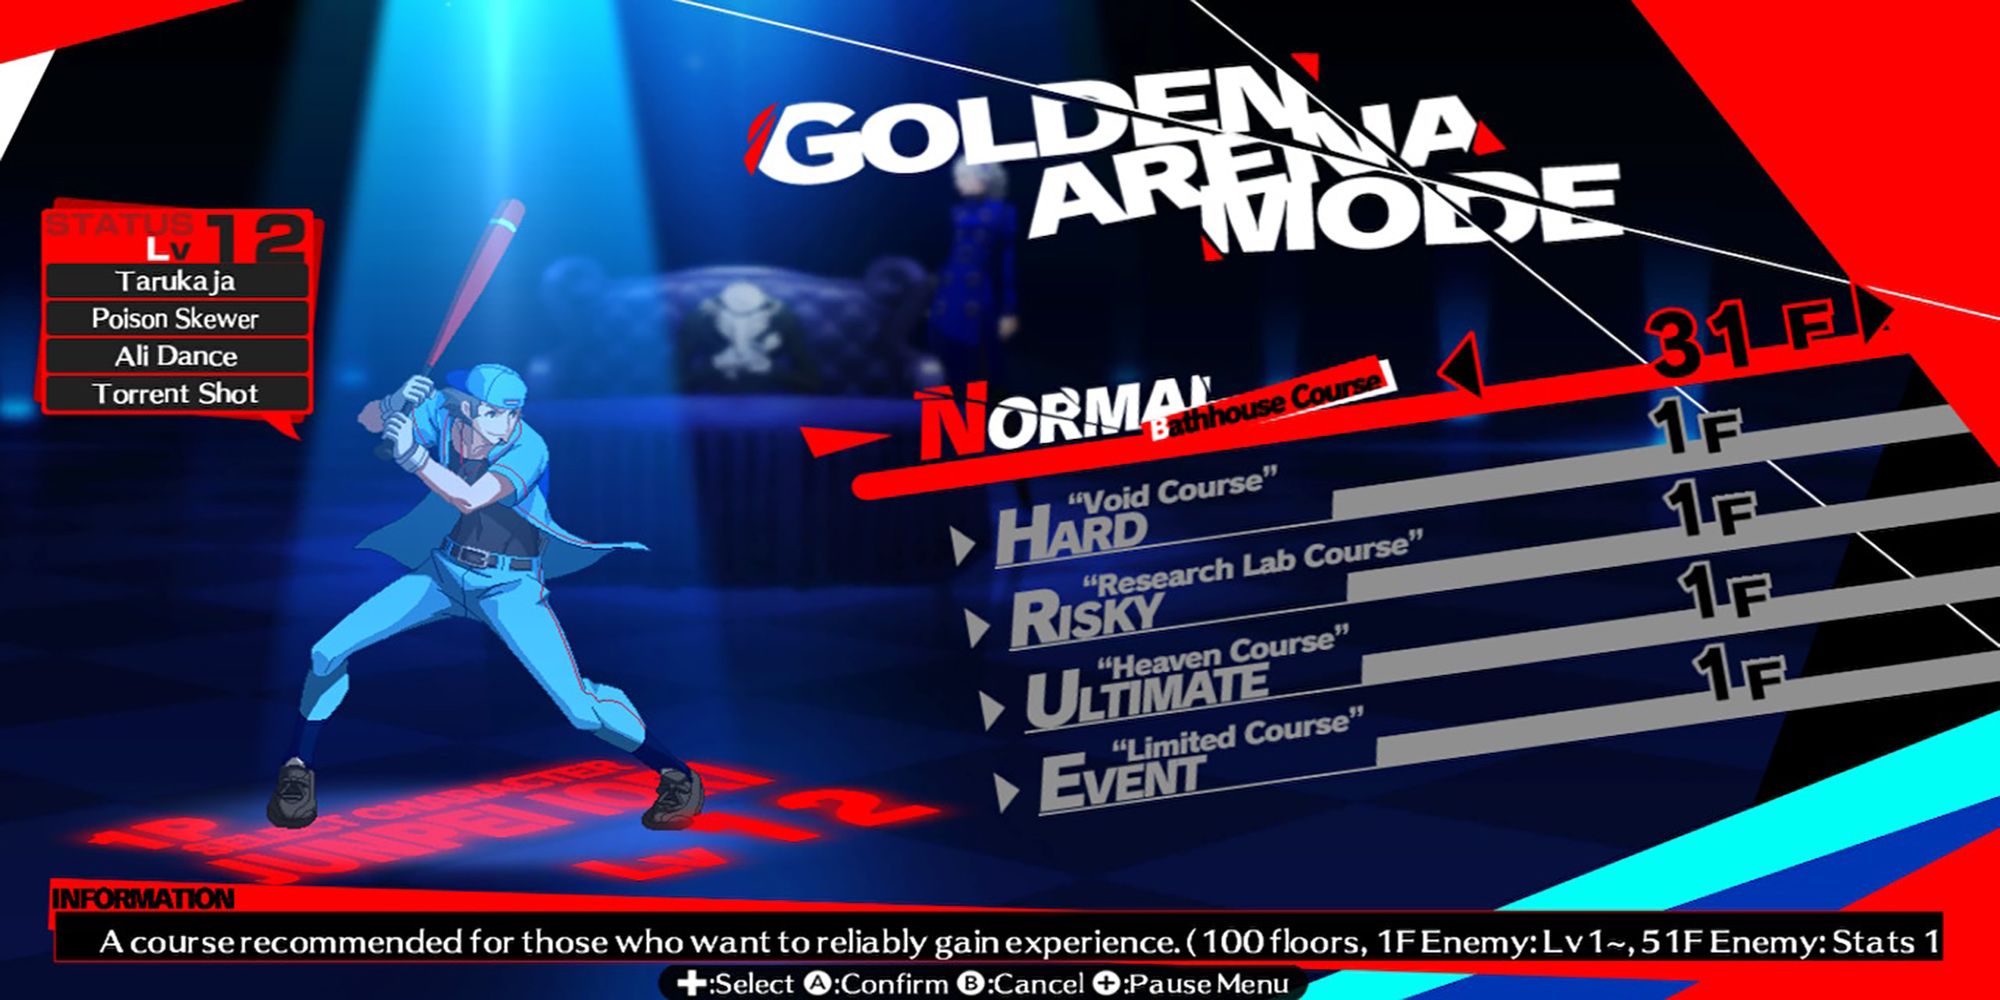 Golden Arena Mode's course selection includes Normal, Hard, Risky, Ultimate, and Event courses. Persona 4 Arena Ultimax.